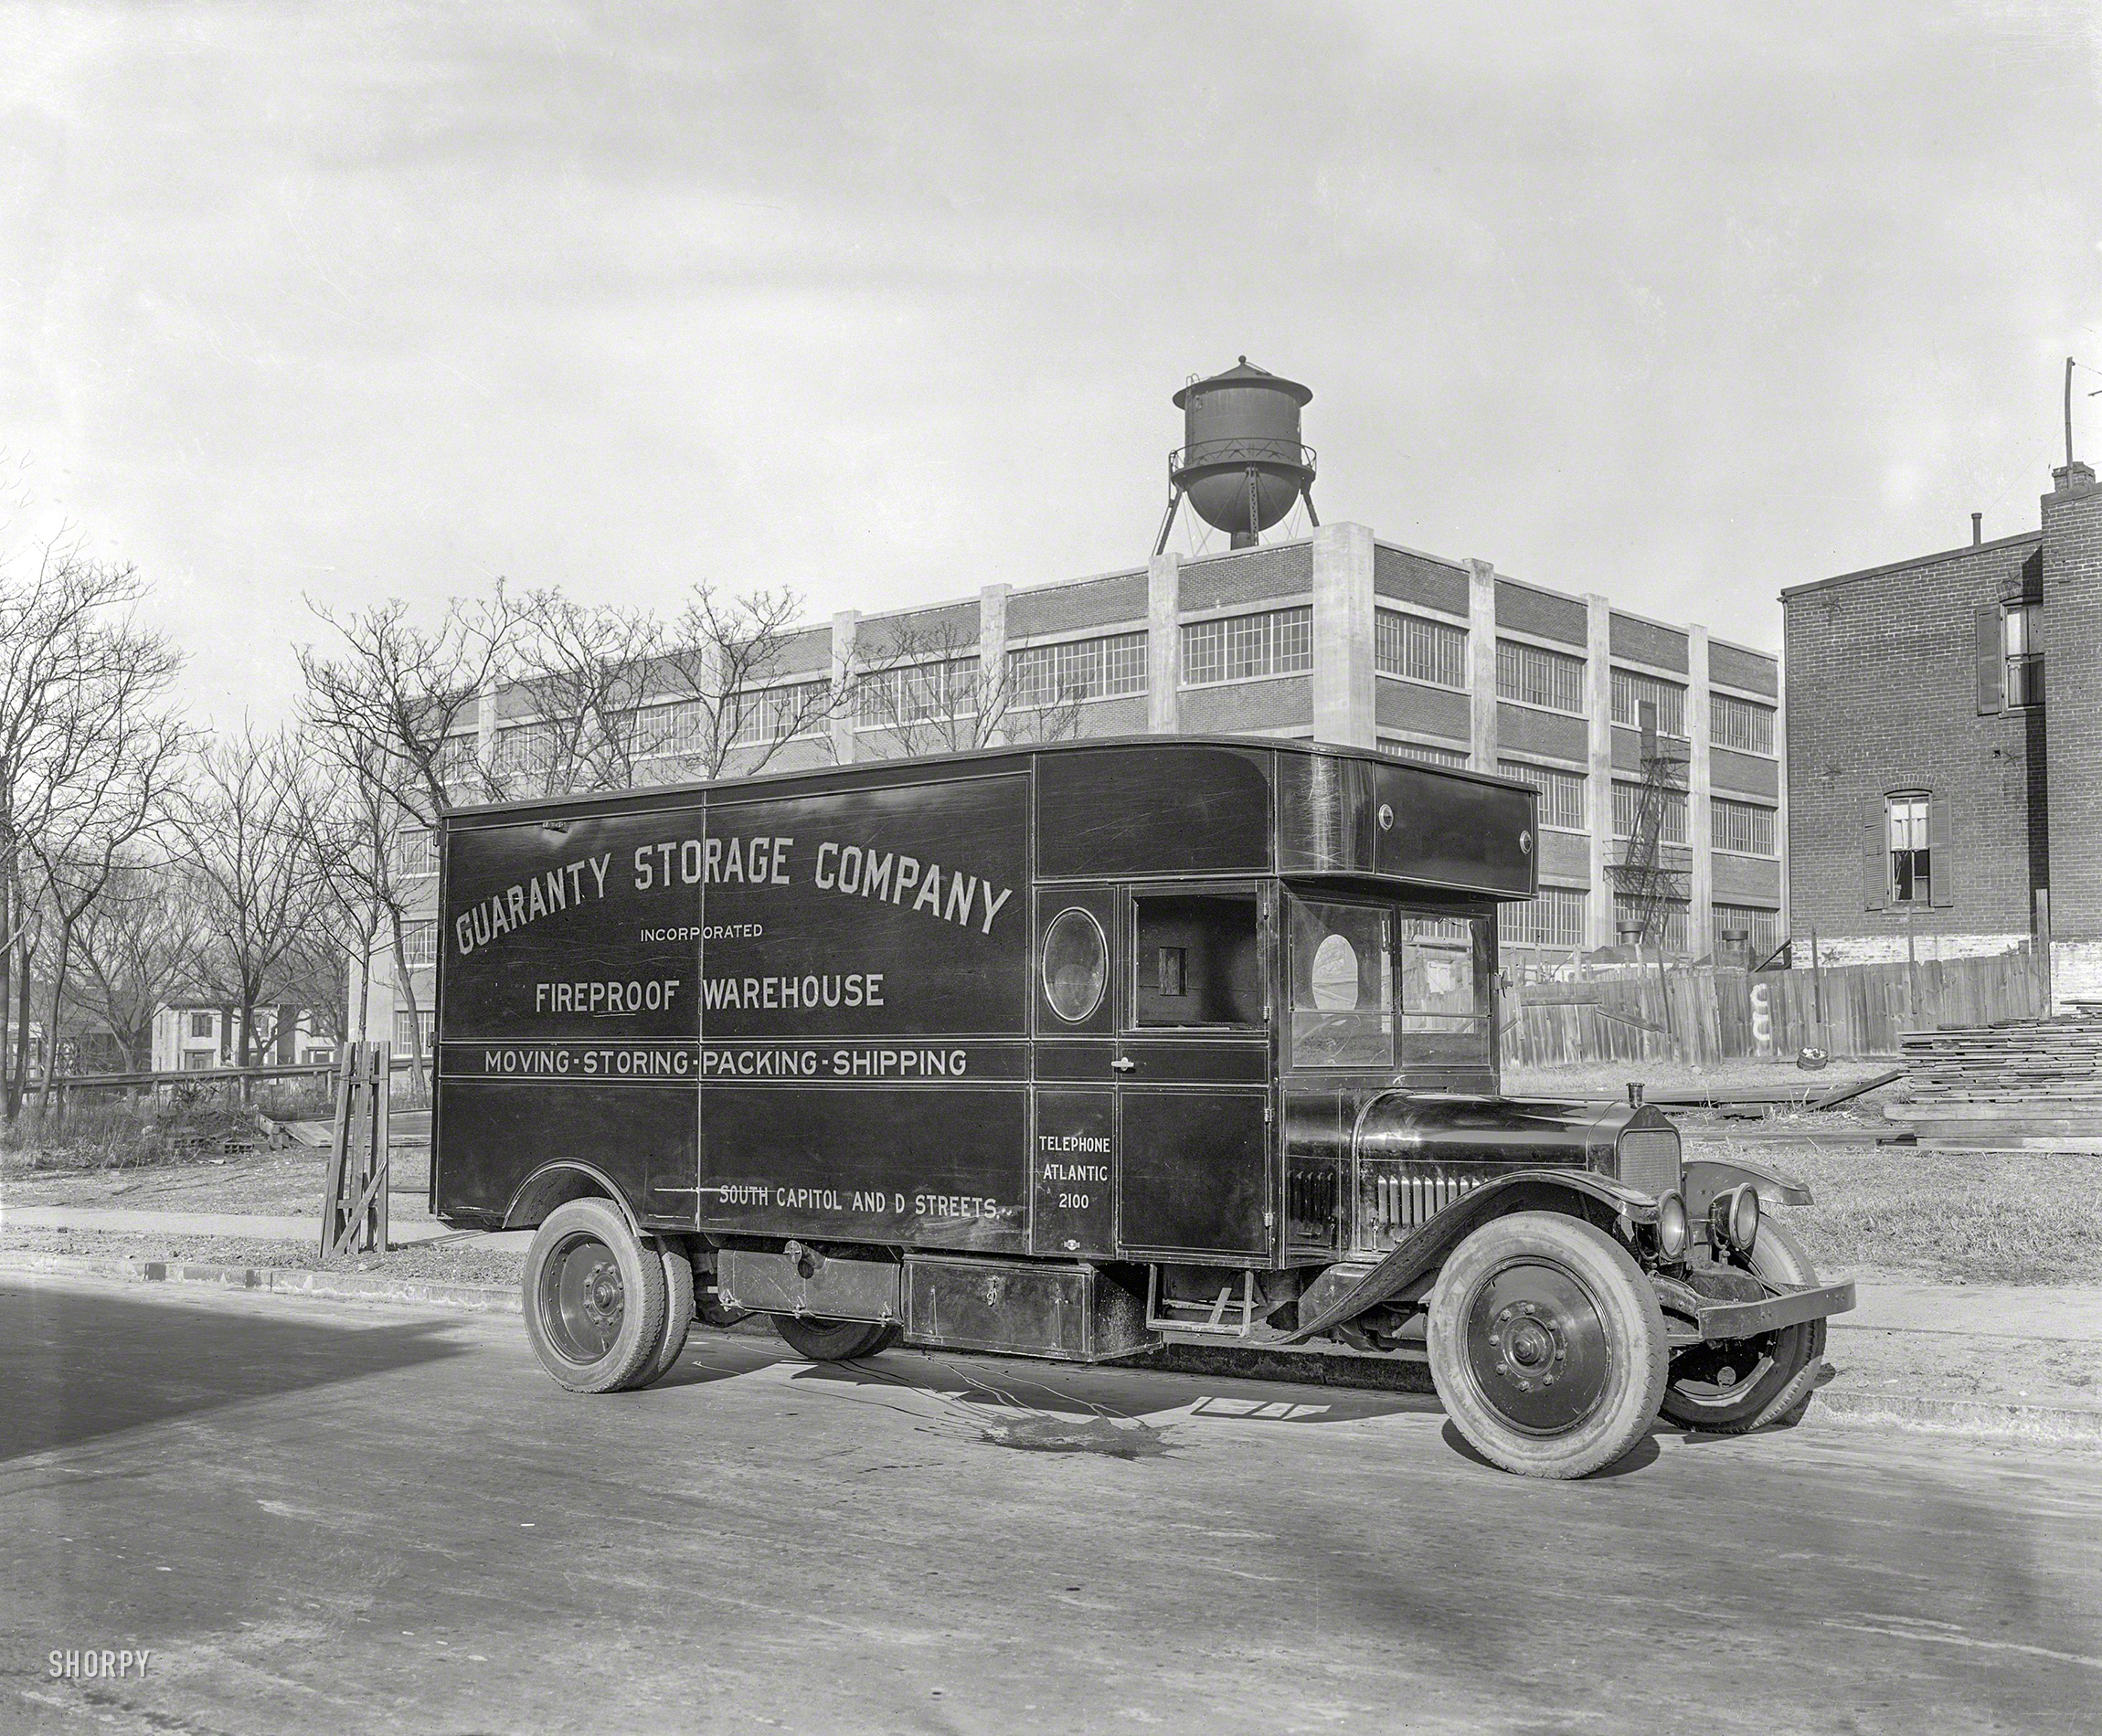 Washington, D.C., circa 1928. "Guaranty Storage Co. truck." Last glimpsed here, before having a little accident. National Photo glass negative. View full size.